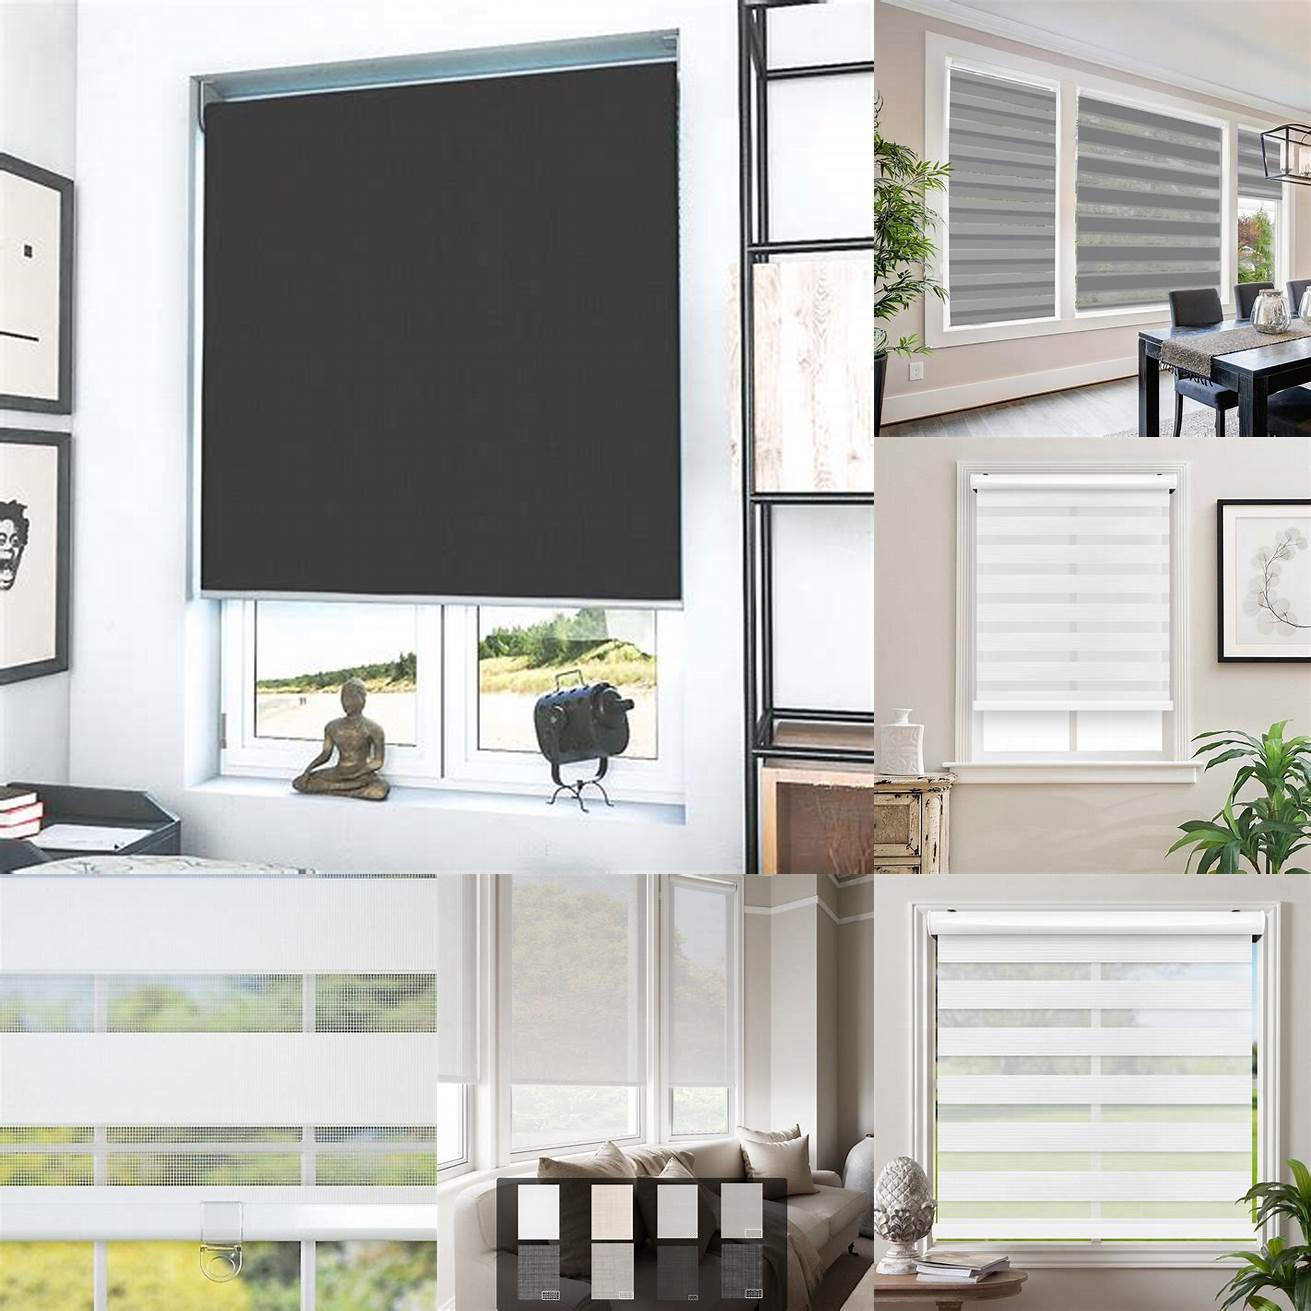 Privacy Roller blinds provide privacy without sacrificing natural light You can lower them completely or partially to control visibility into your space